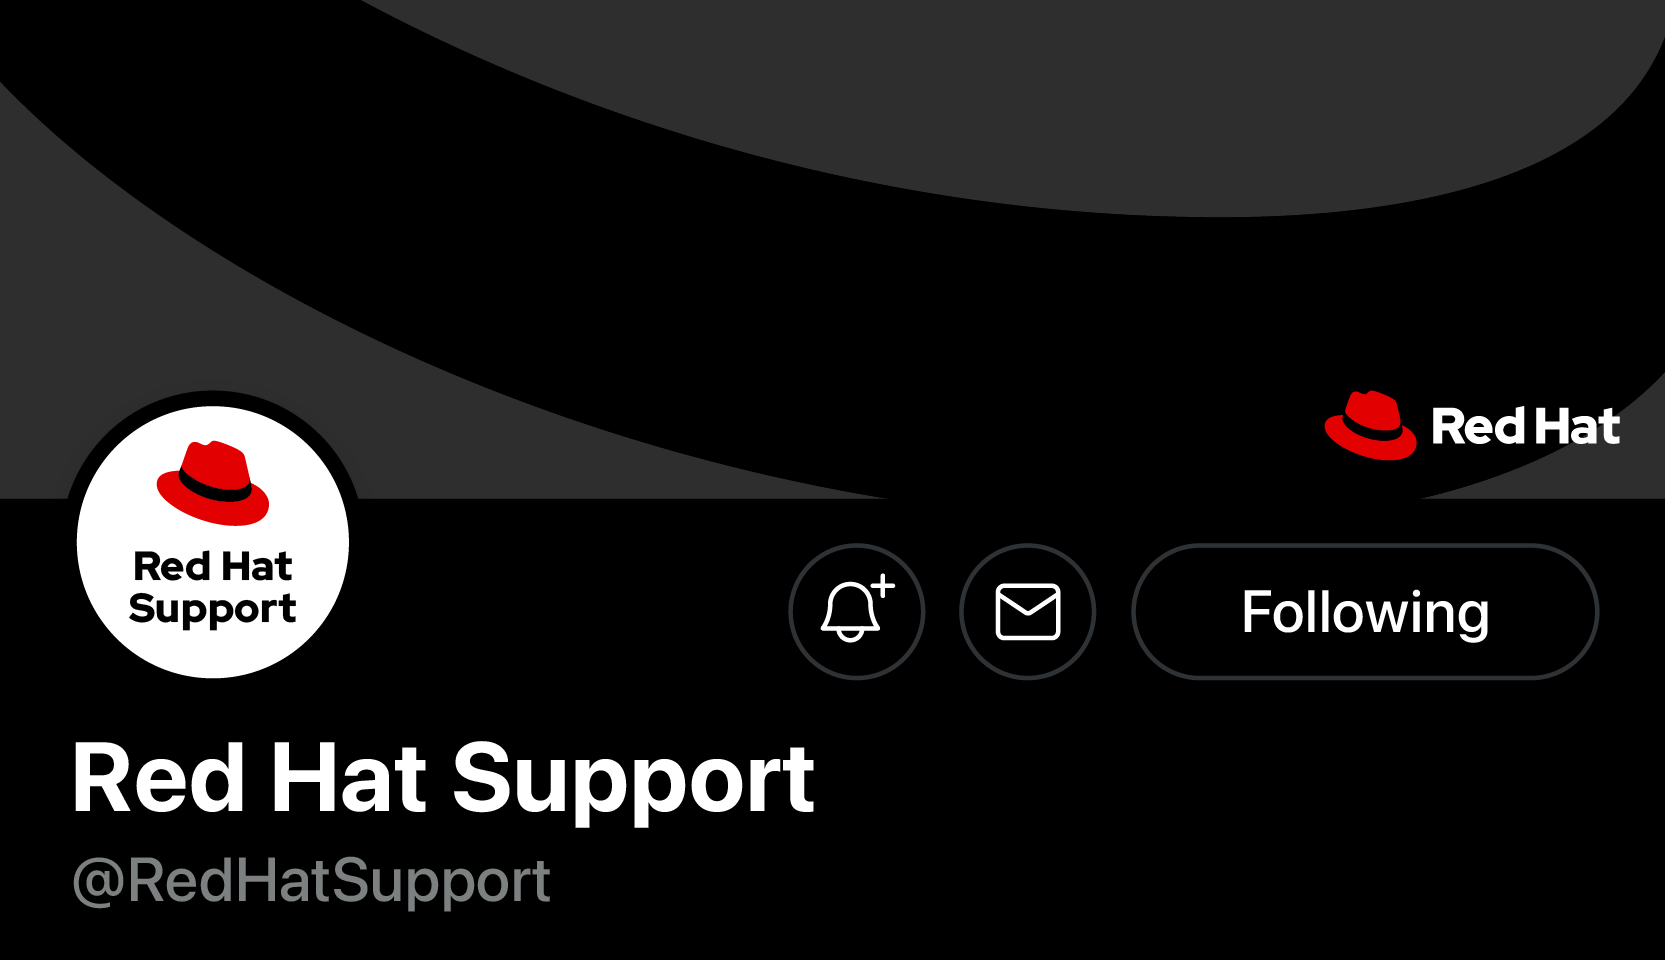 Screenshot of the Red Hat Support Twitter account showing the Red Hat fedora icon in the profile picture and the header image.